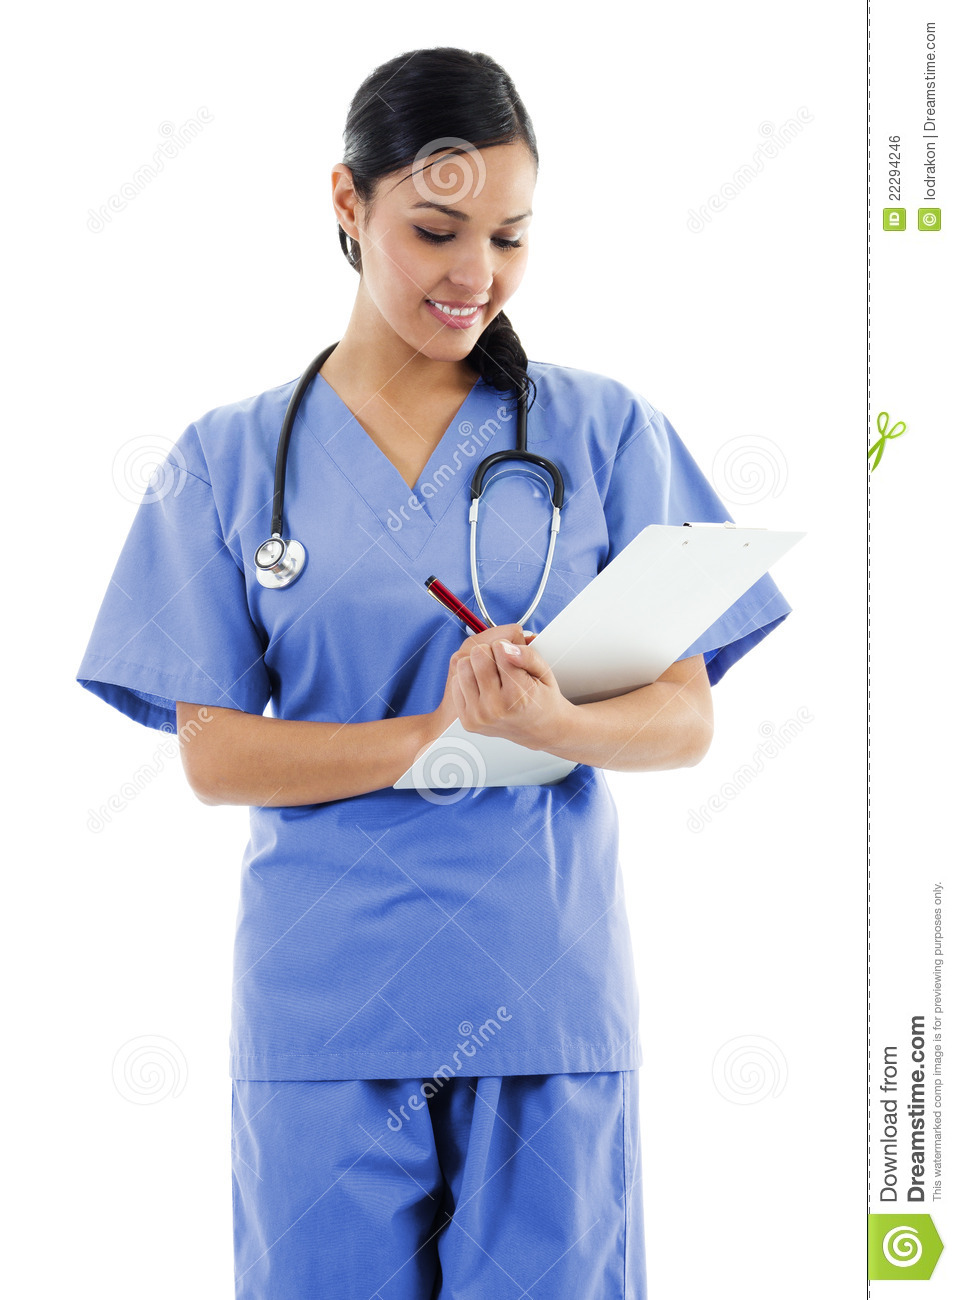 Female Healthcare Worker Isolated On White Background